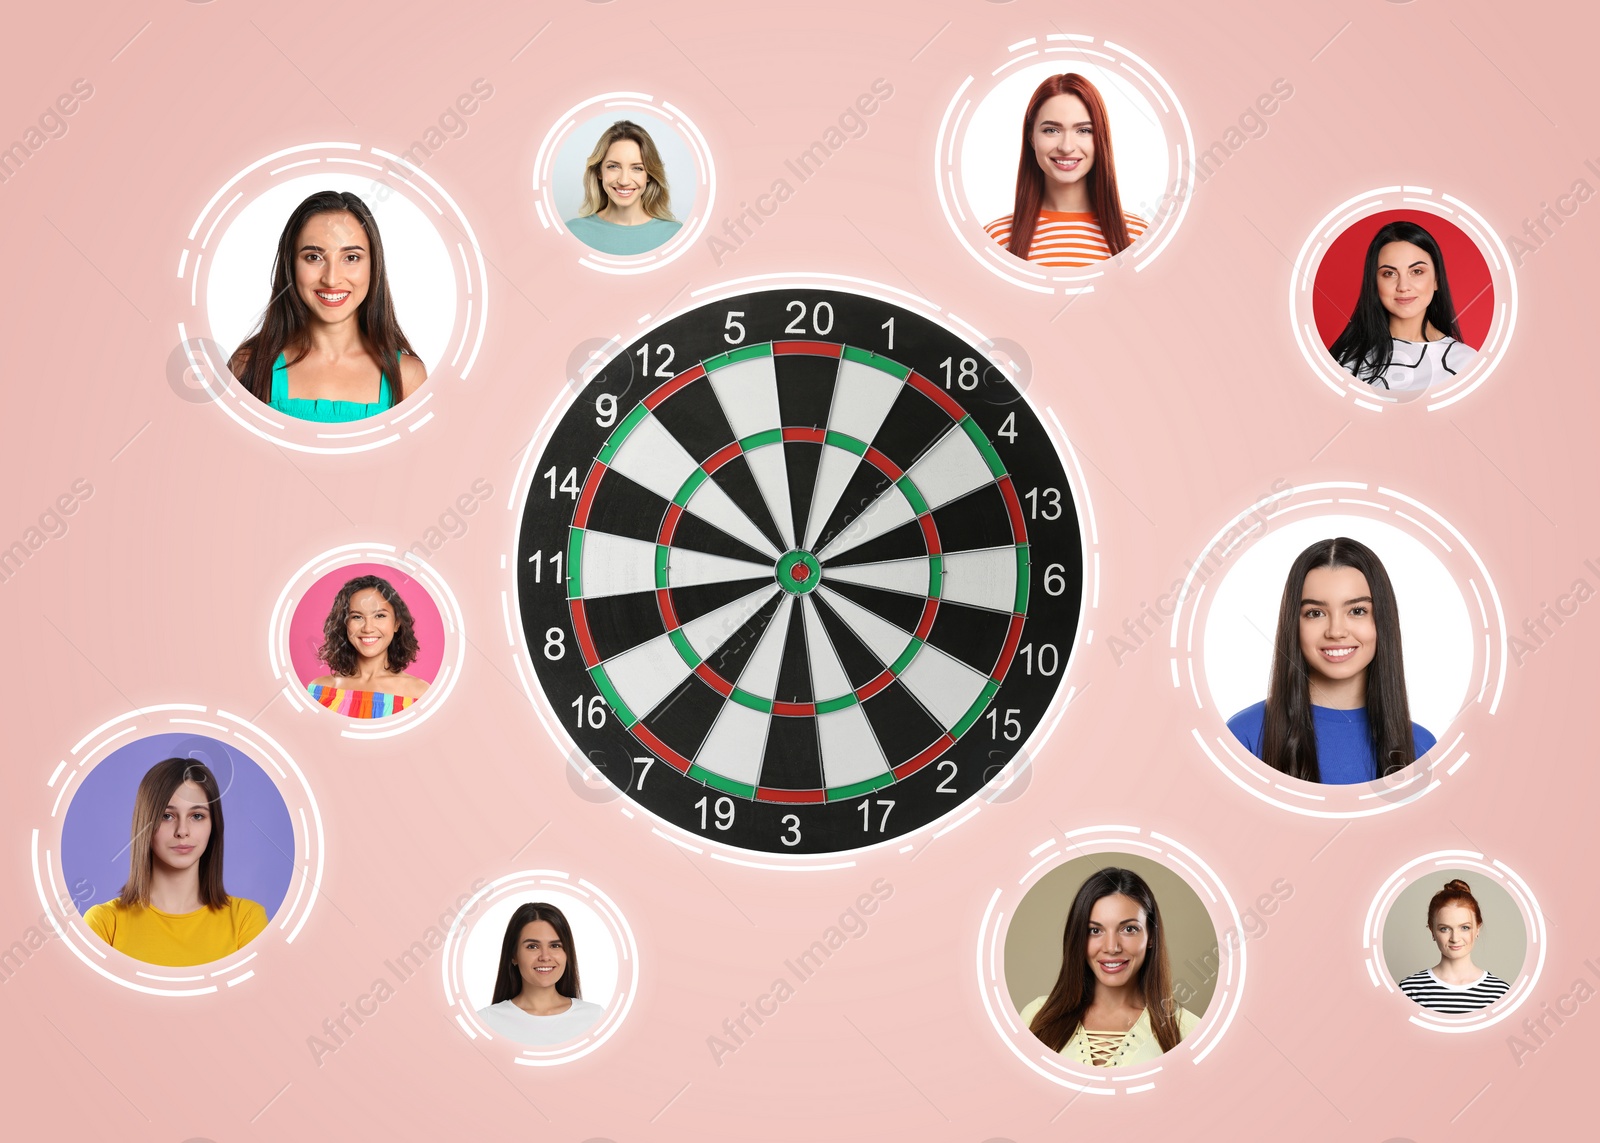 Image of Target audience. Dartboard surrounded by photos of potential clients on pink background